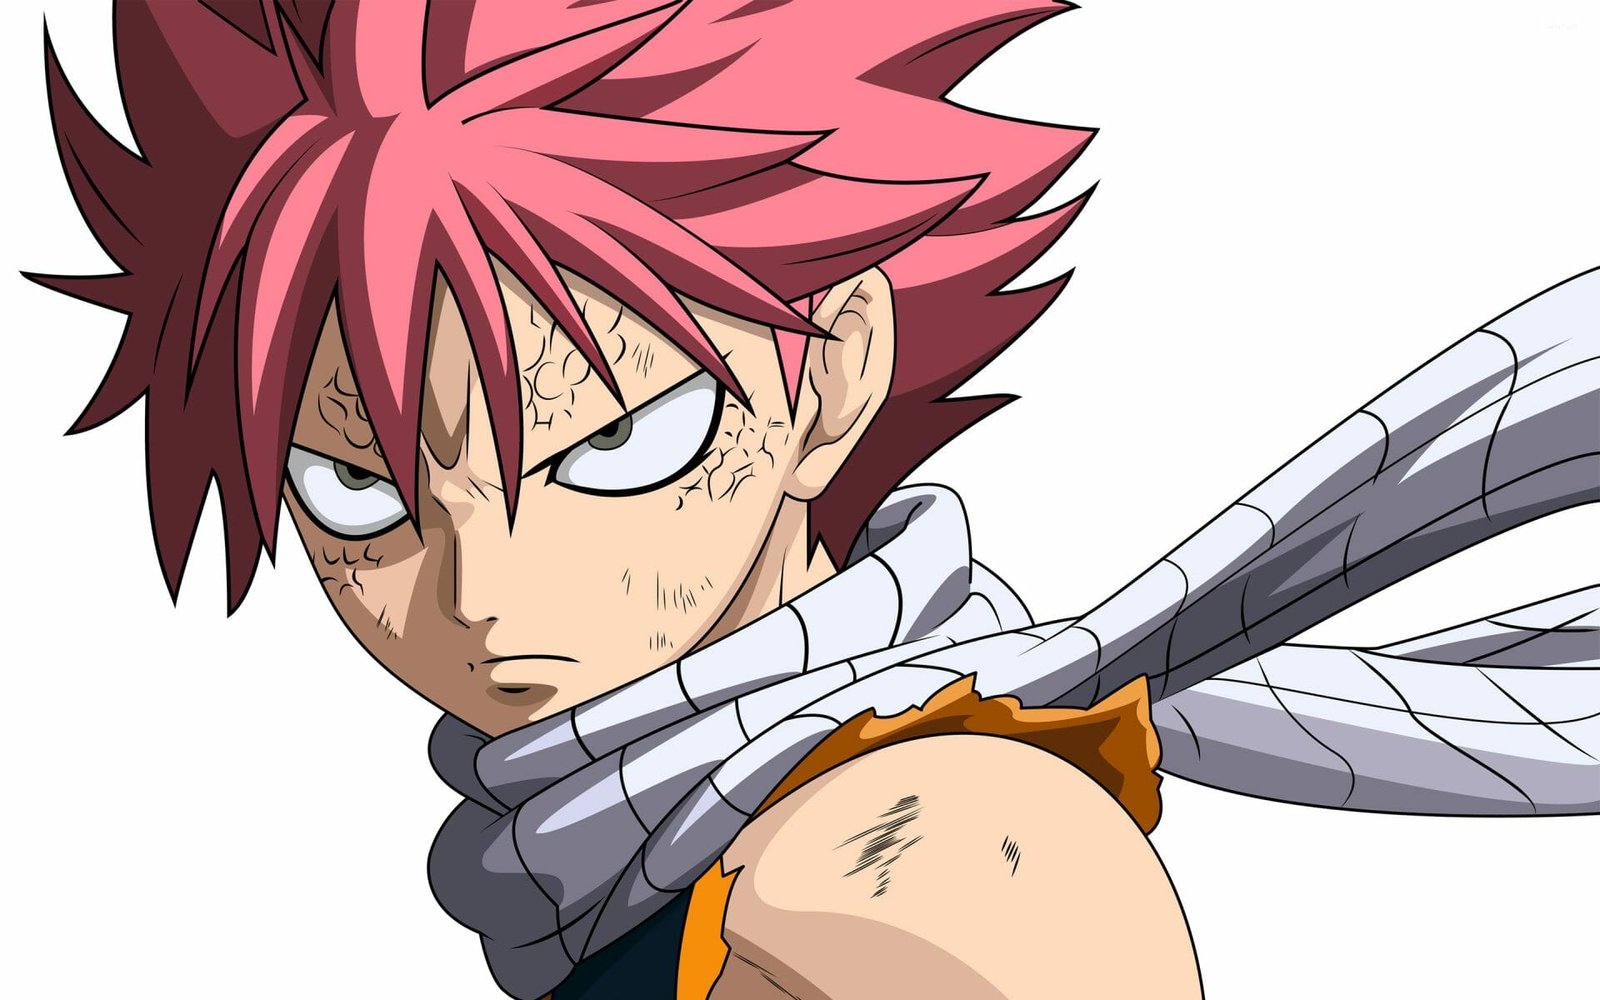 Natsu Dragneel from Fairy Tail